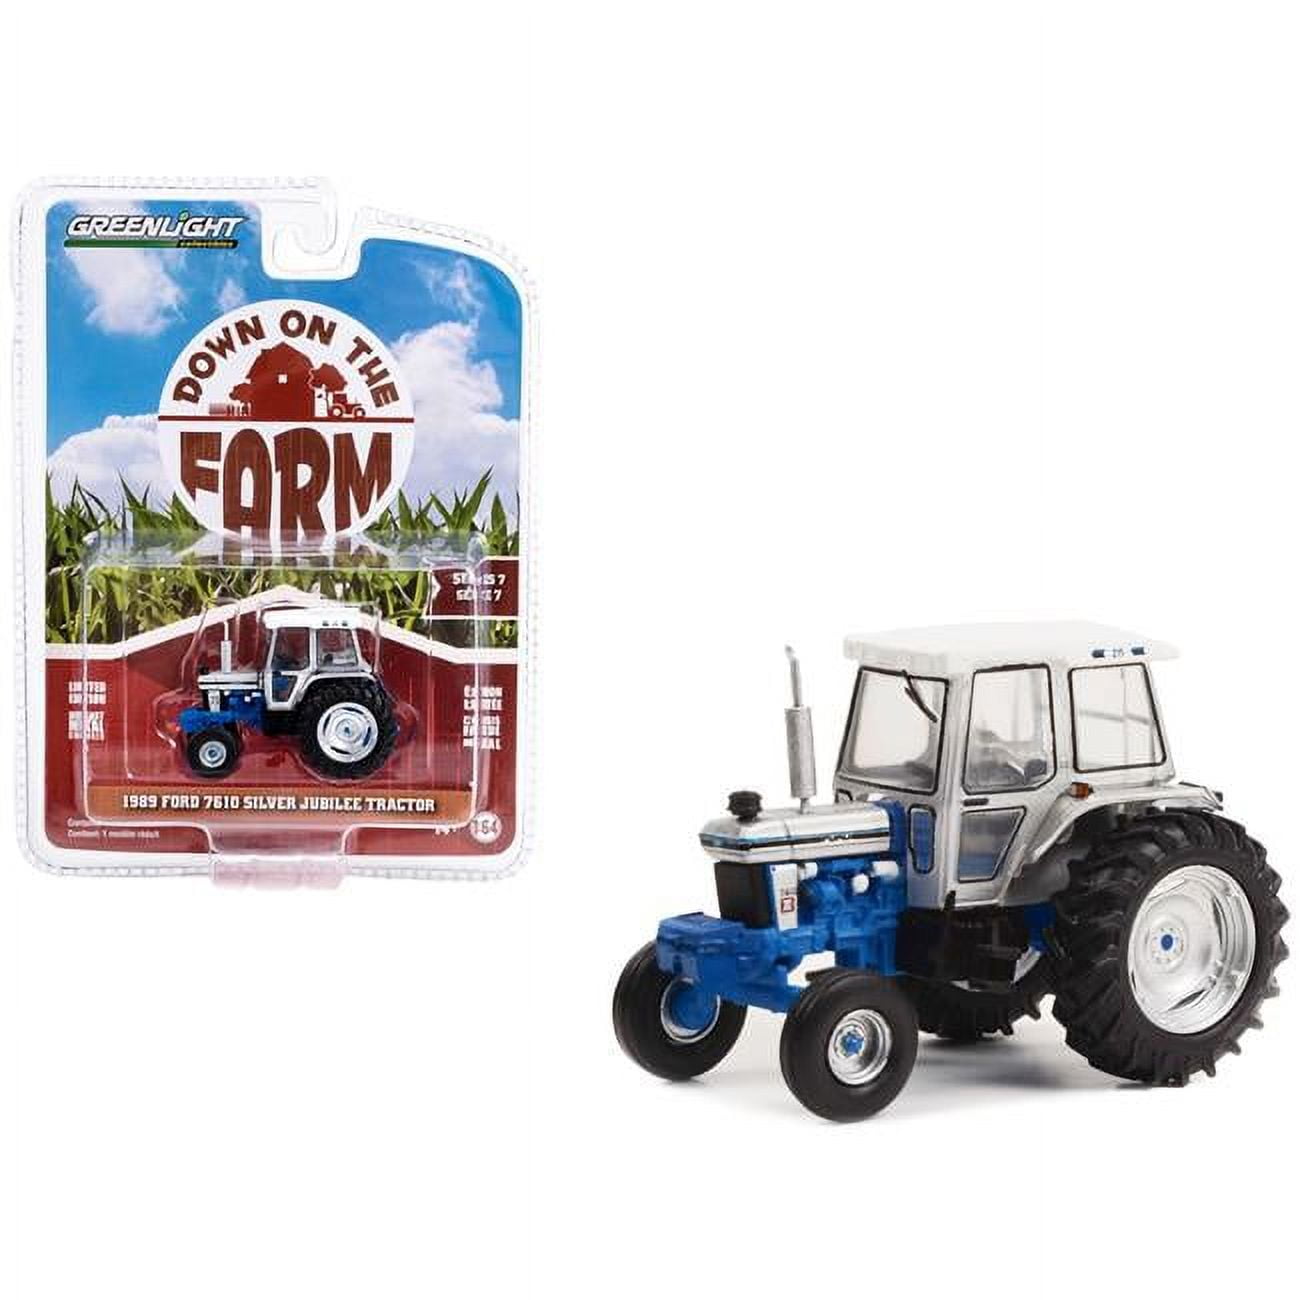 48070E 1989 Ford 7610 Silver Jubilee Tractor Top Down on the Farm Series 7 1-64 Diecast Model Cars, Silver, Blue & White -  GreenLight